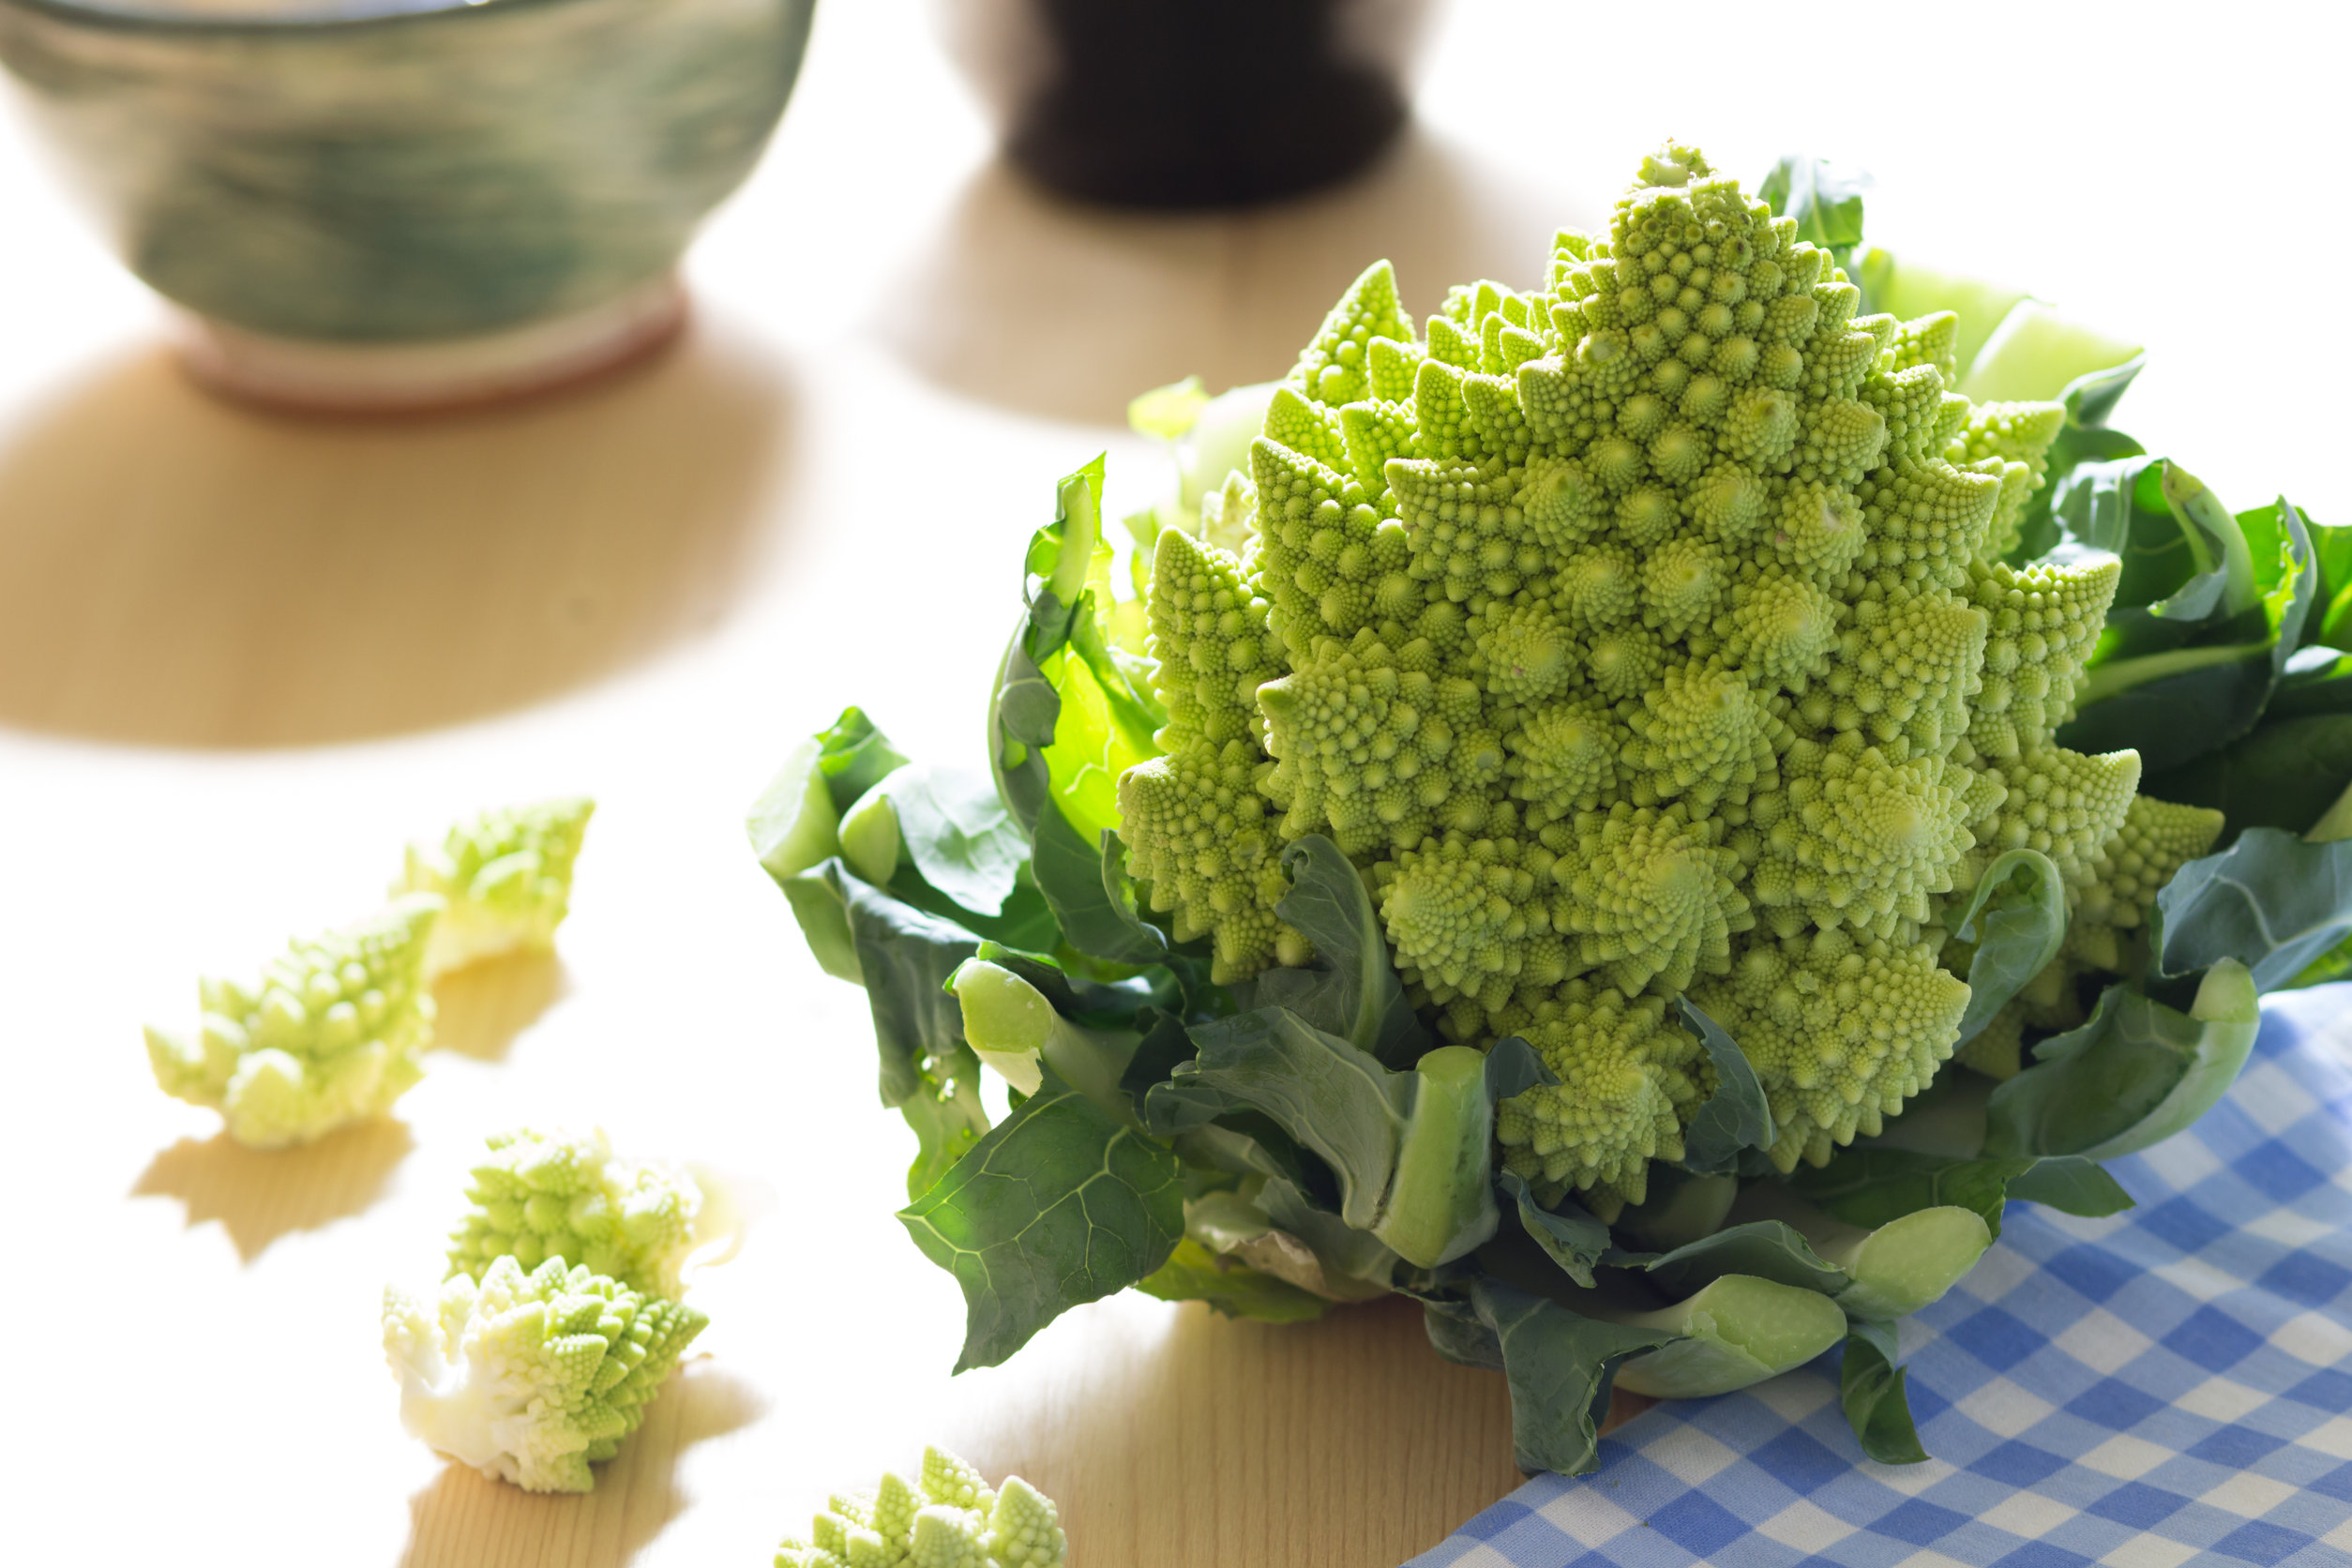 romanesco broccoli or cauliflower with florets scattered on a pale wood background and gingham cloth.